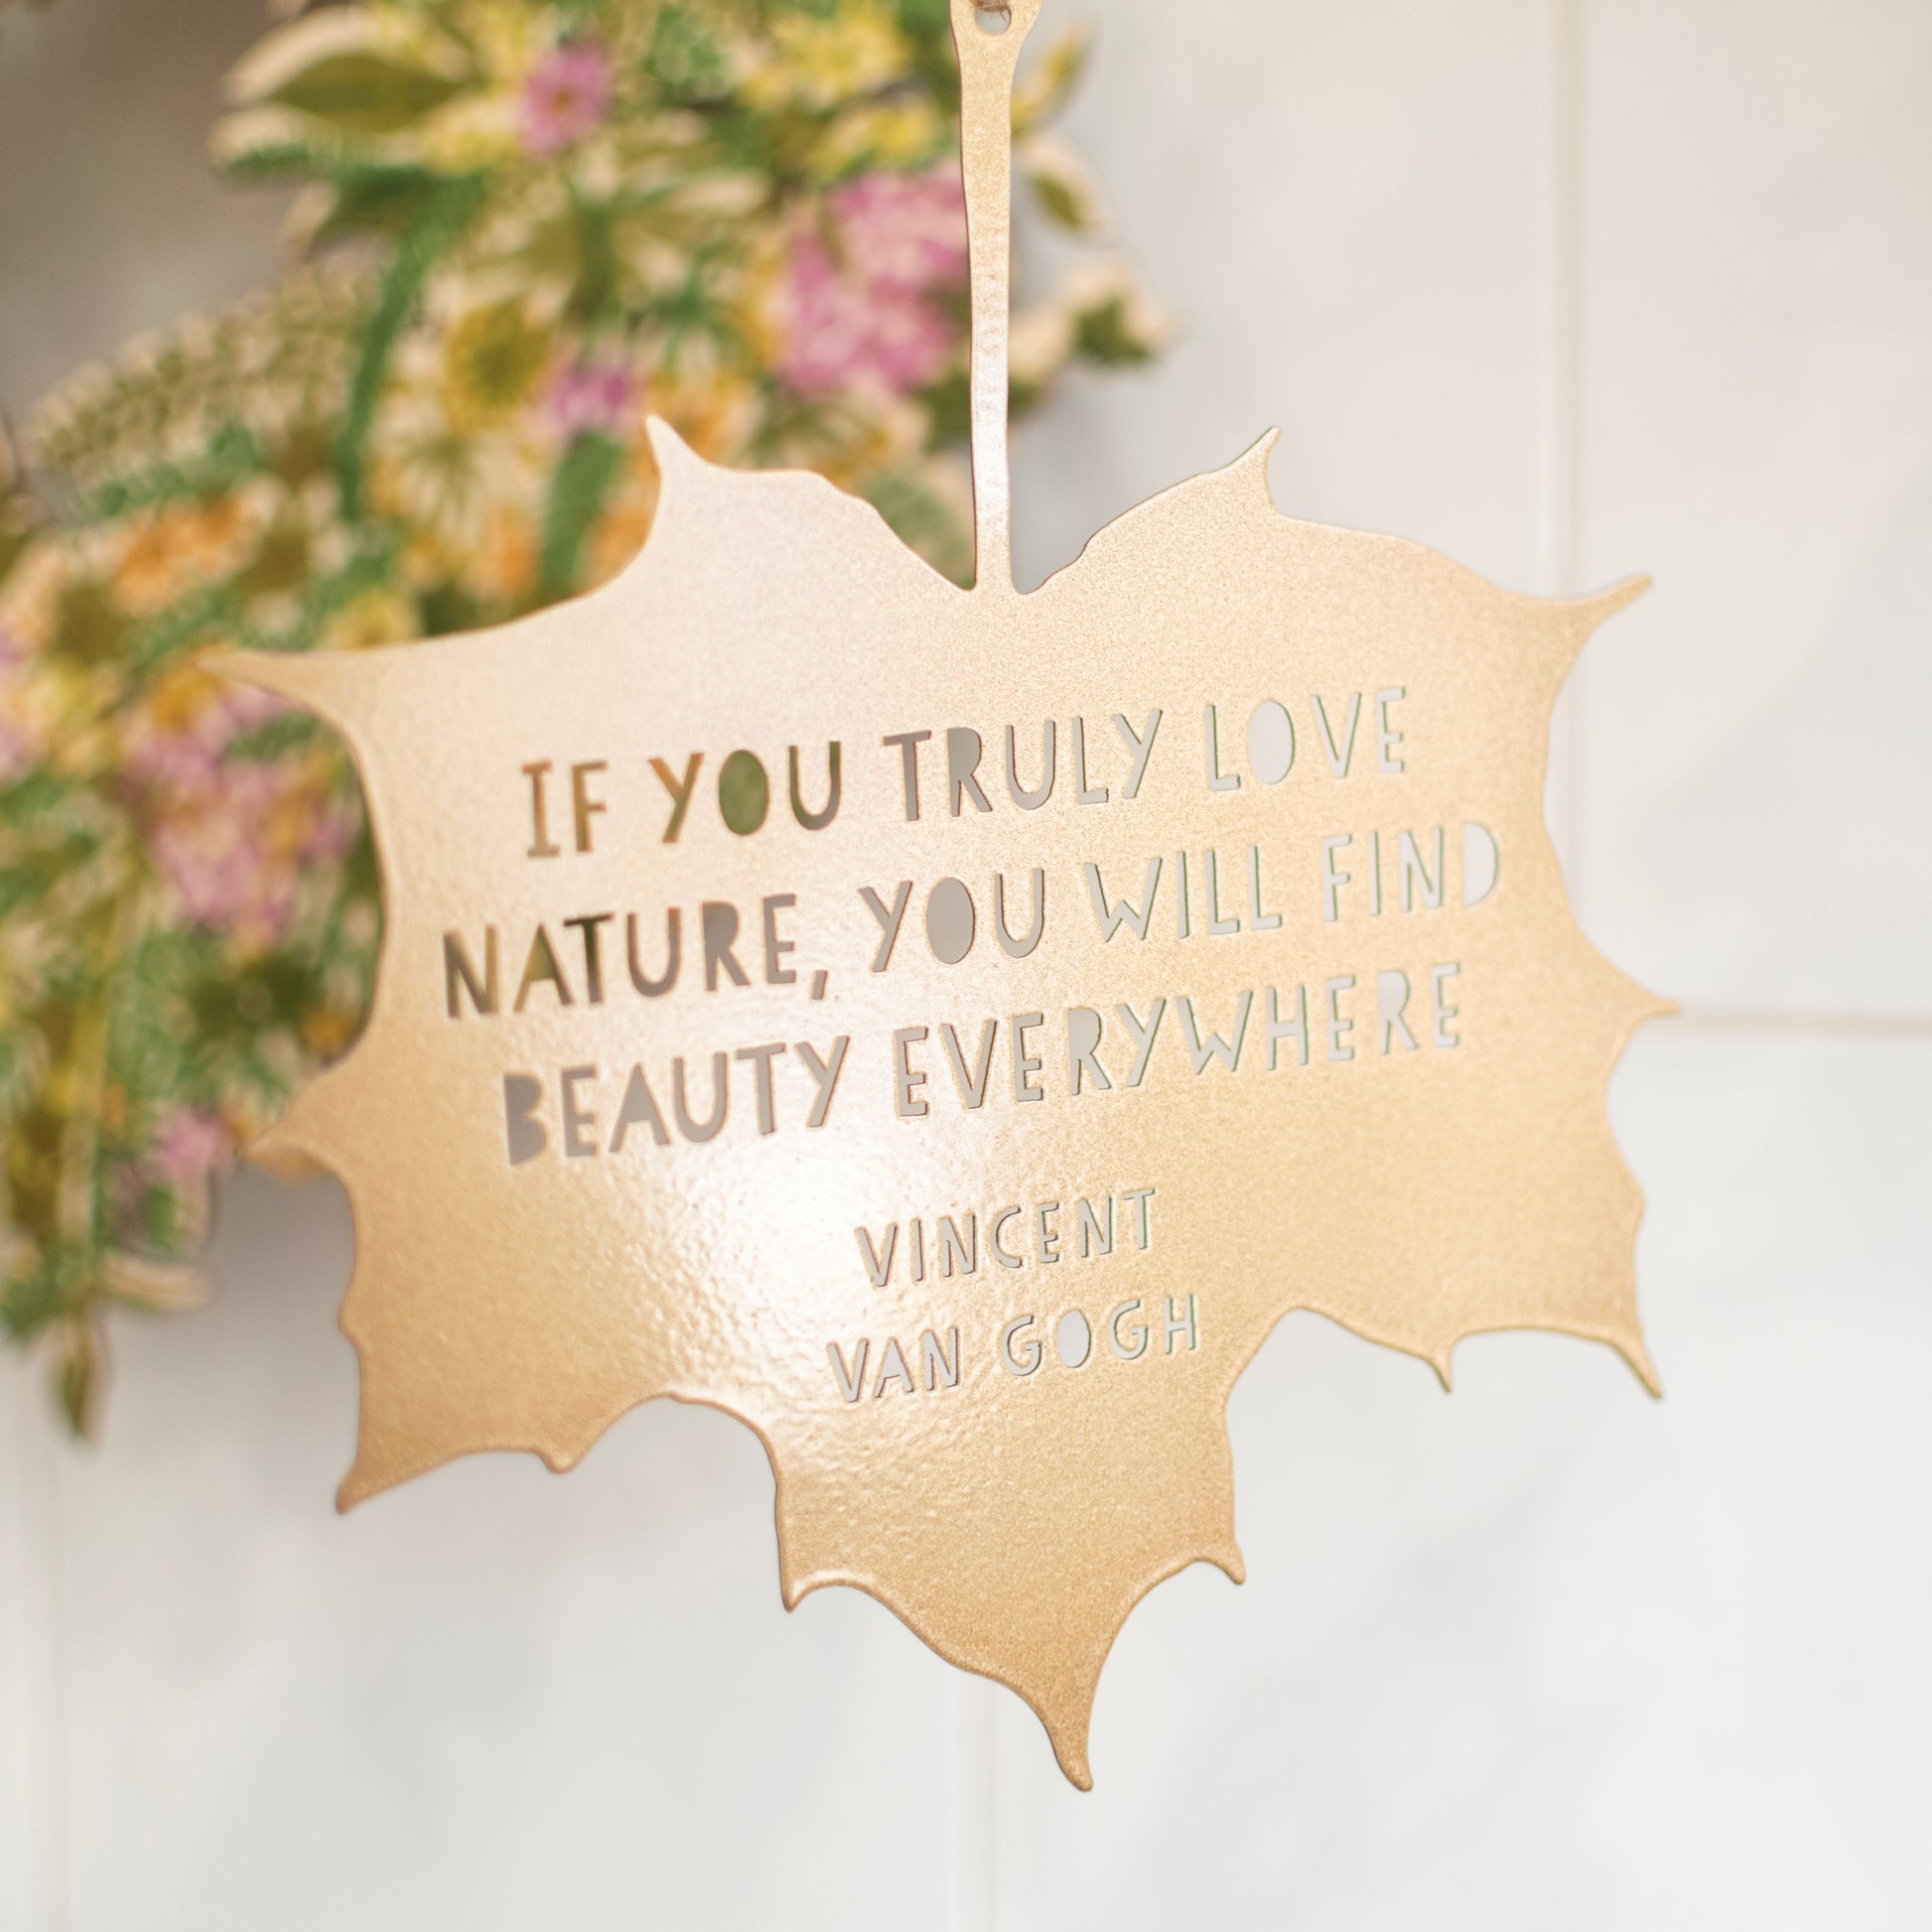 Leaf Quote - If you truly love nature you will find beauty everywhere - Vincent Van Gogh - The Bristol Artisan Handmade Sustainable Gifts and Homewares.